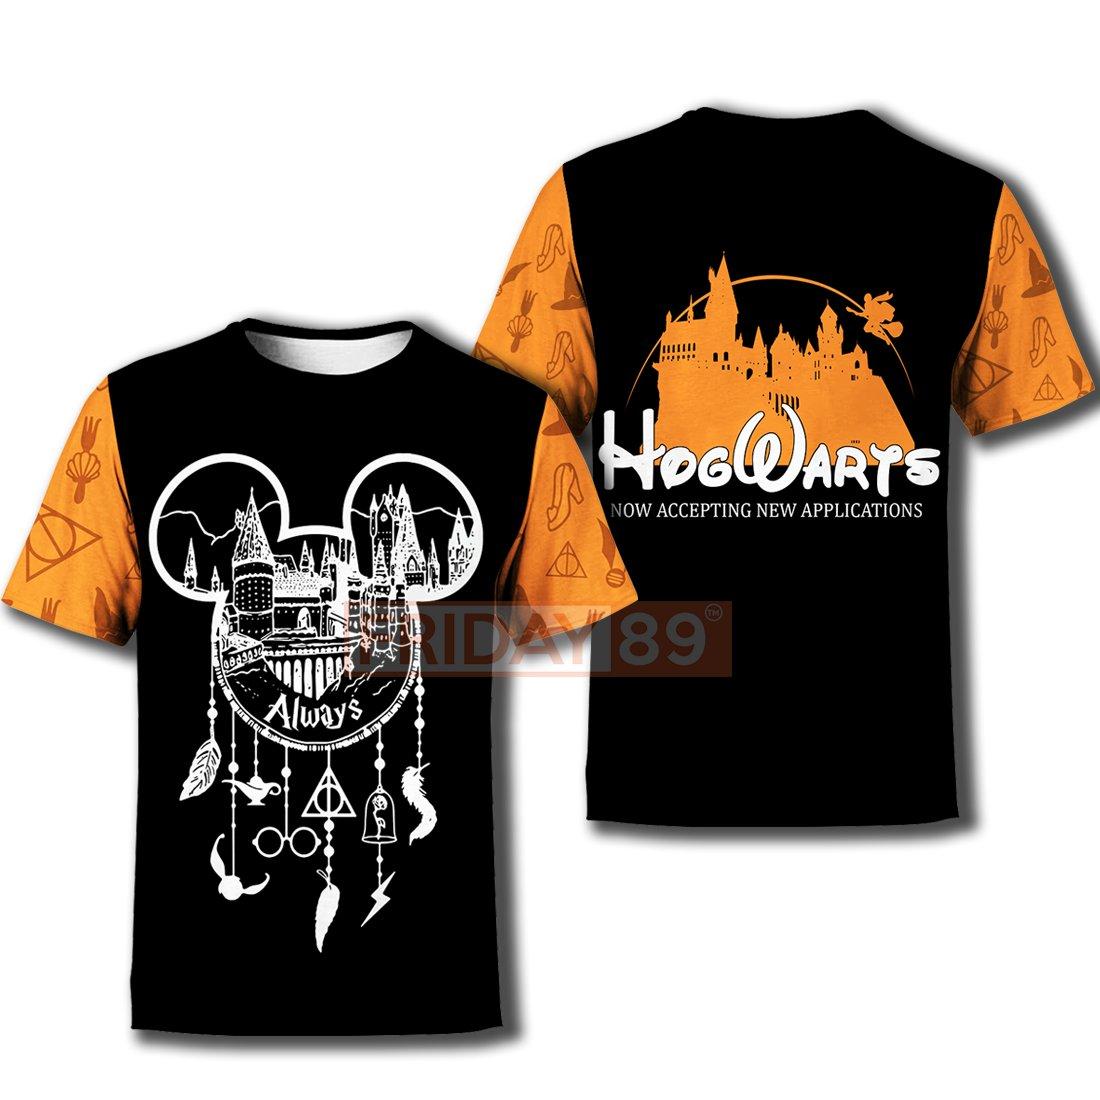 Hogwarts castle now accepting new applications t-shirt